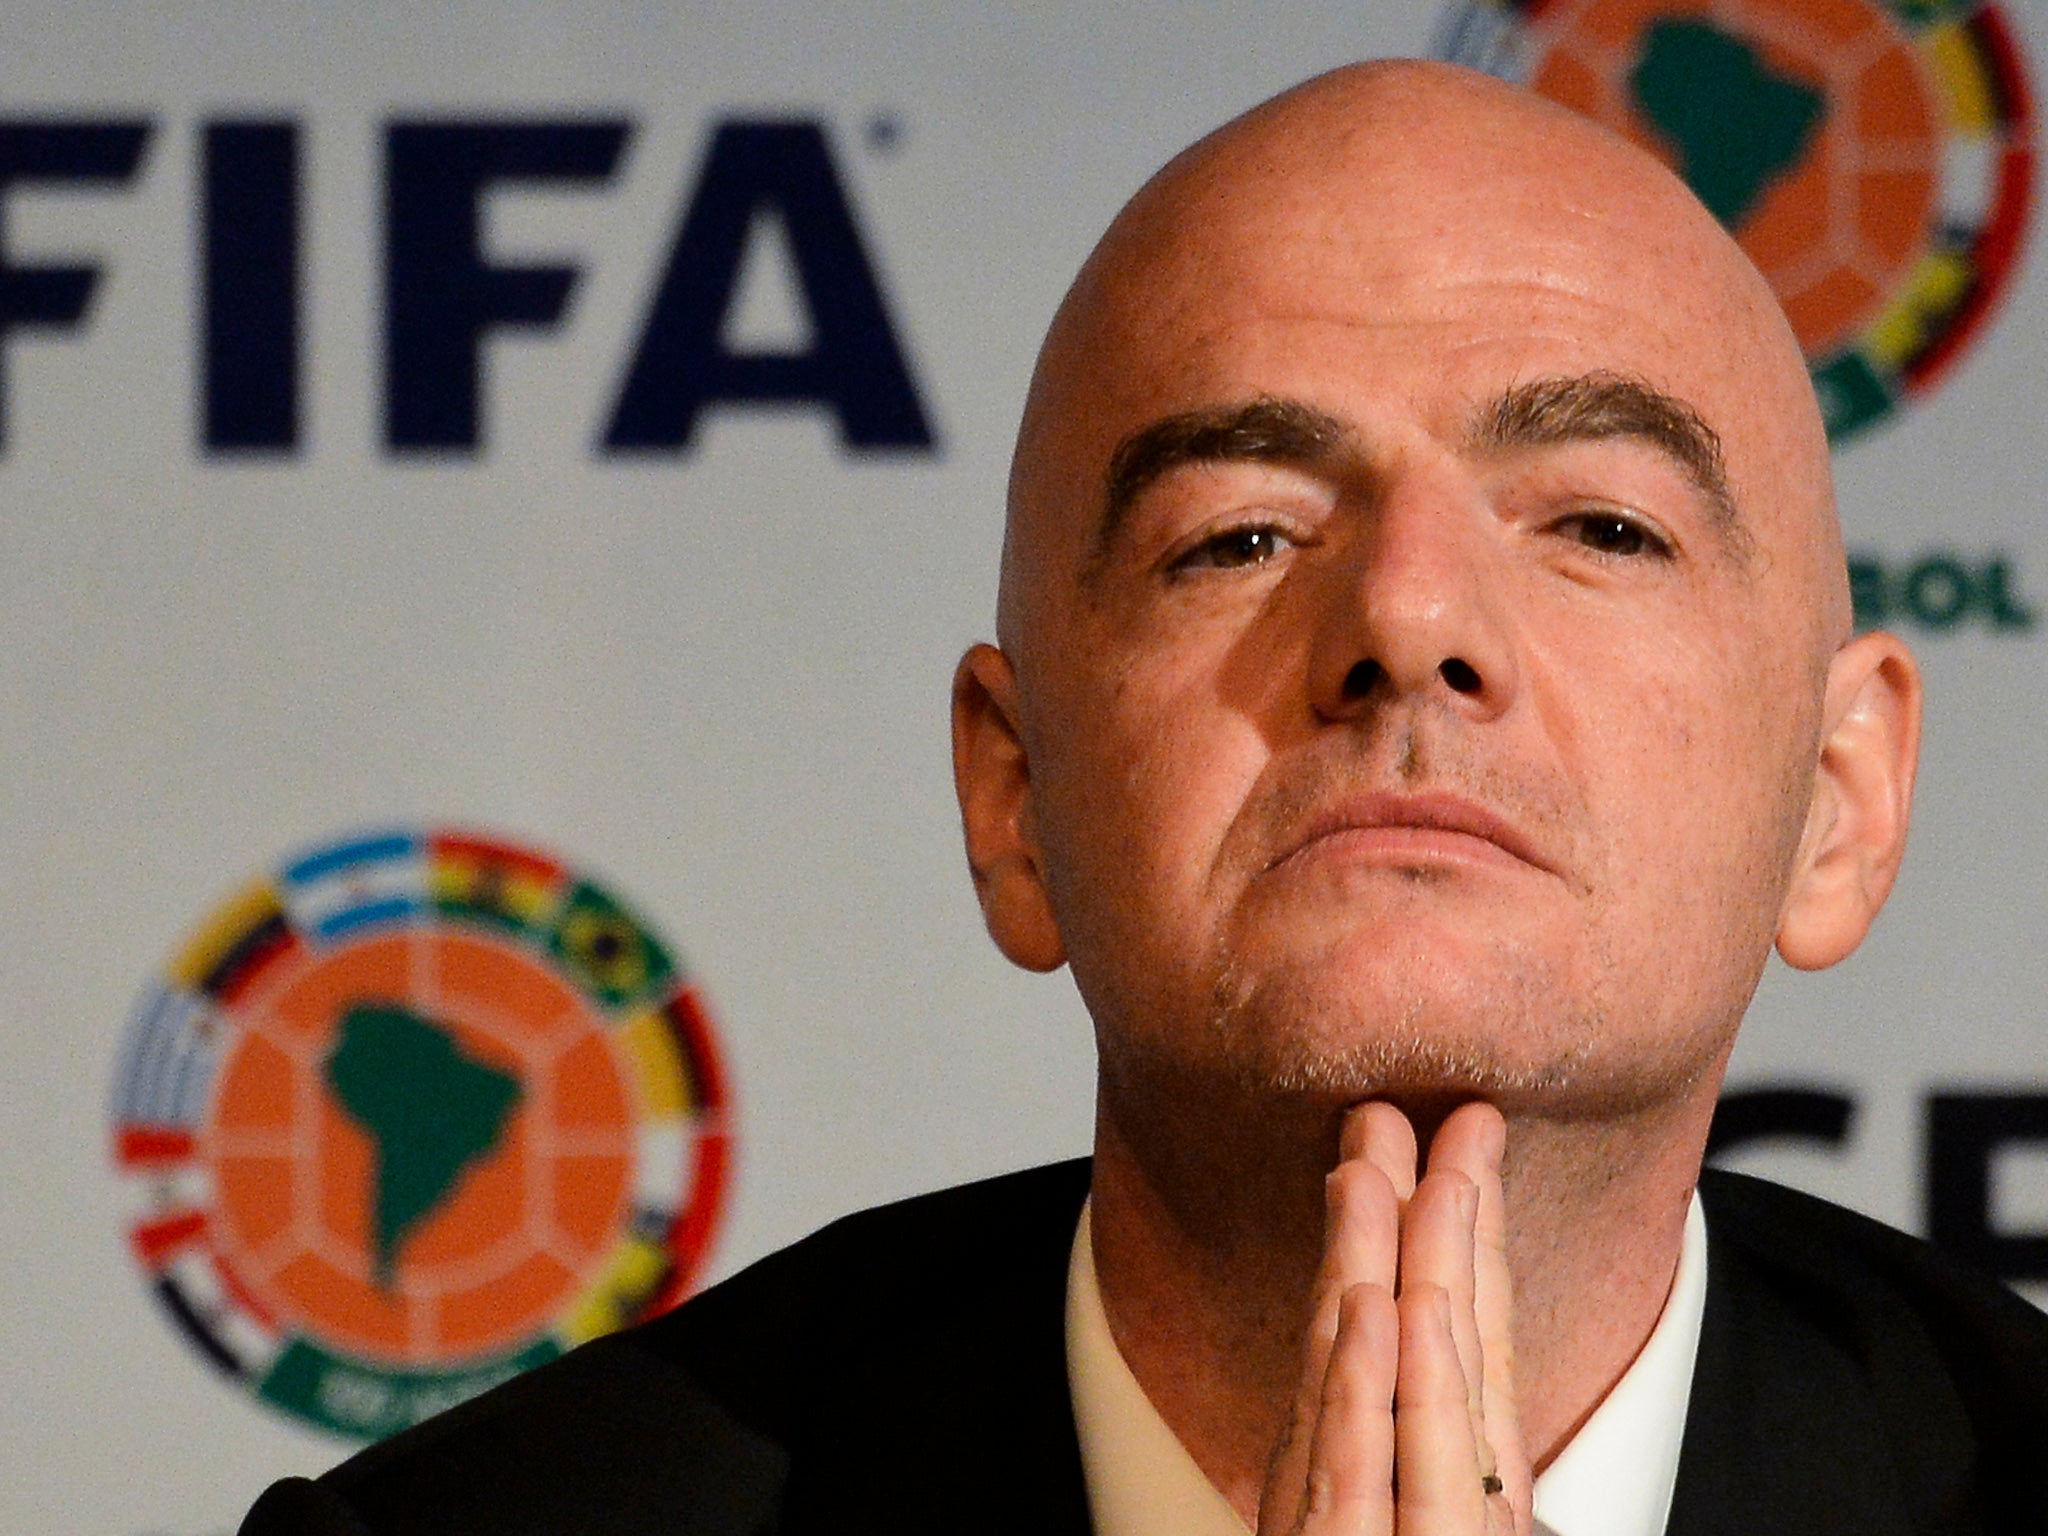 Gianni Infantino was director of legal services at Uefa when the contracts were agreed